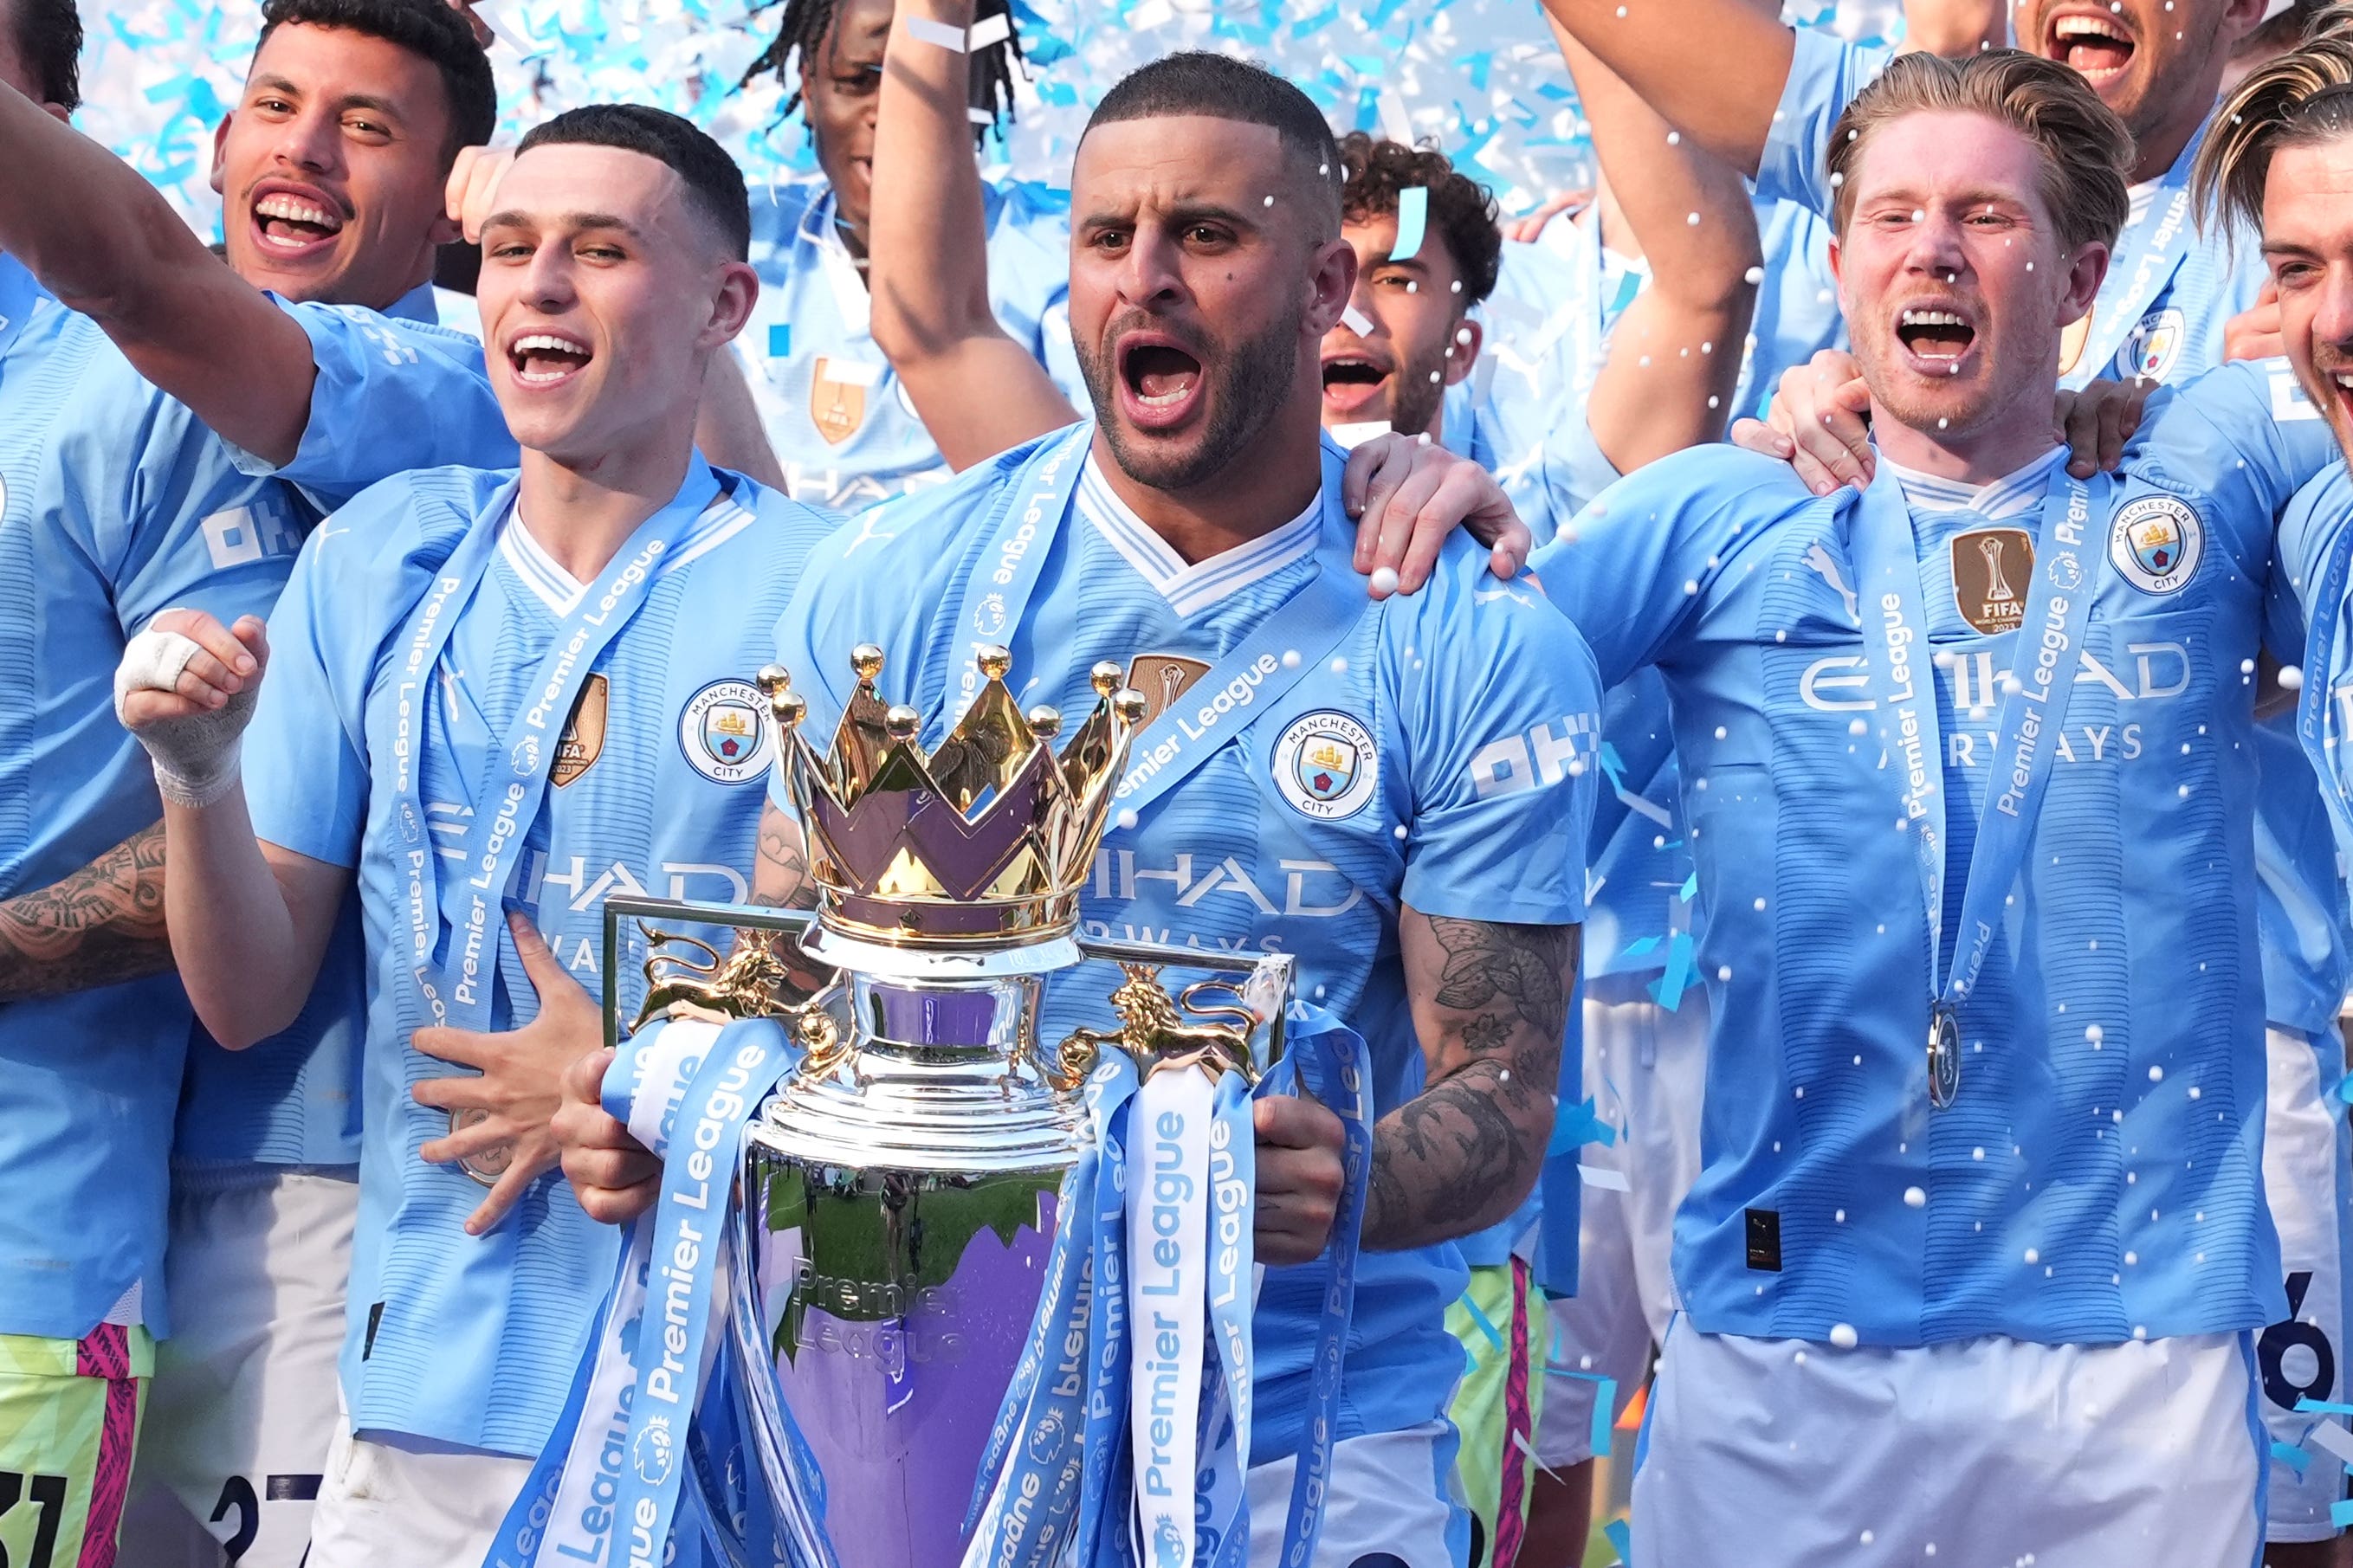 Man City rattled off a fourth straight Premier League title but endured a mixed campaign